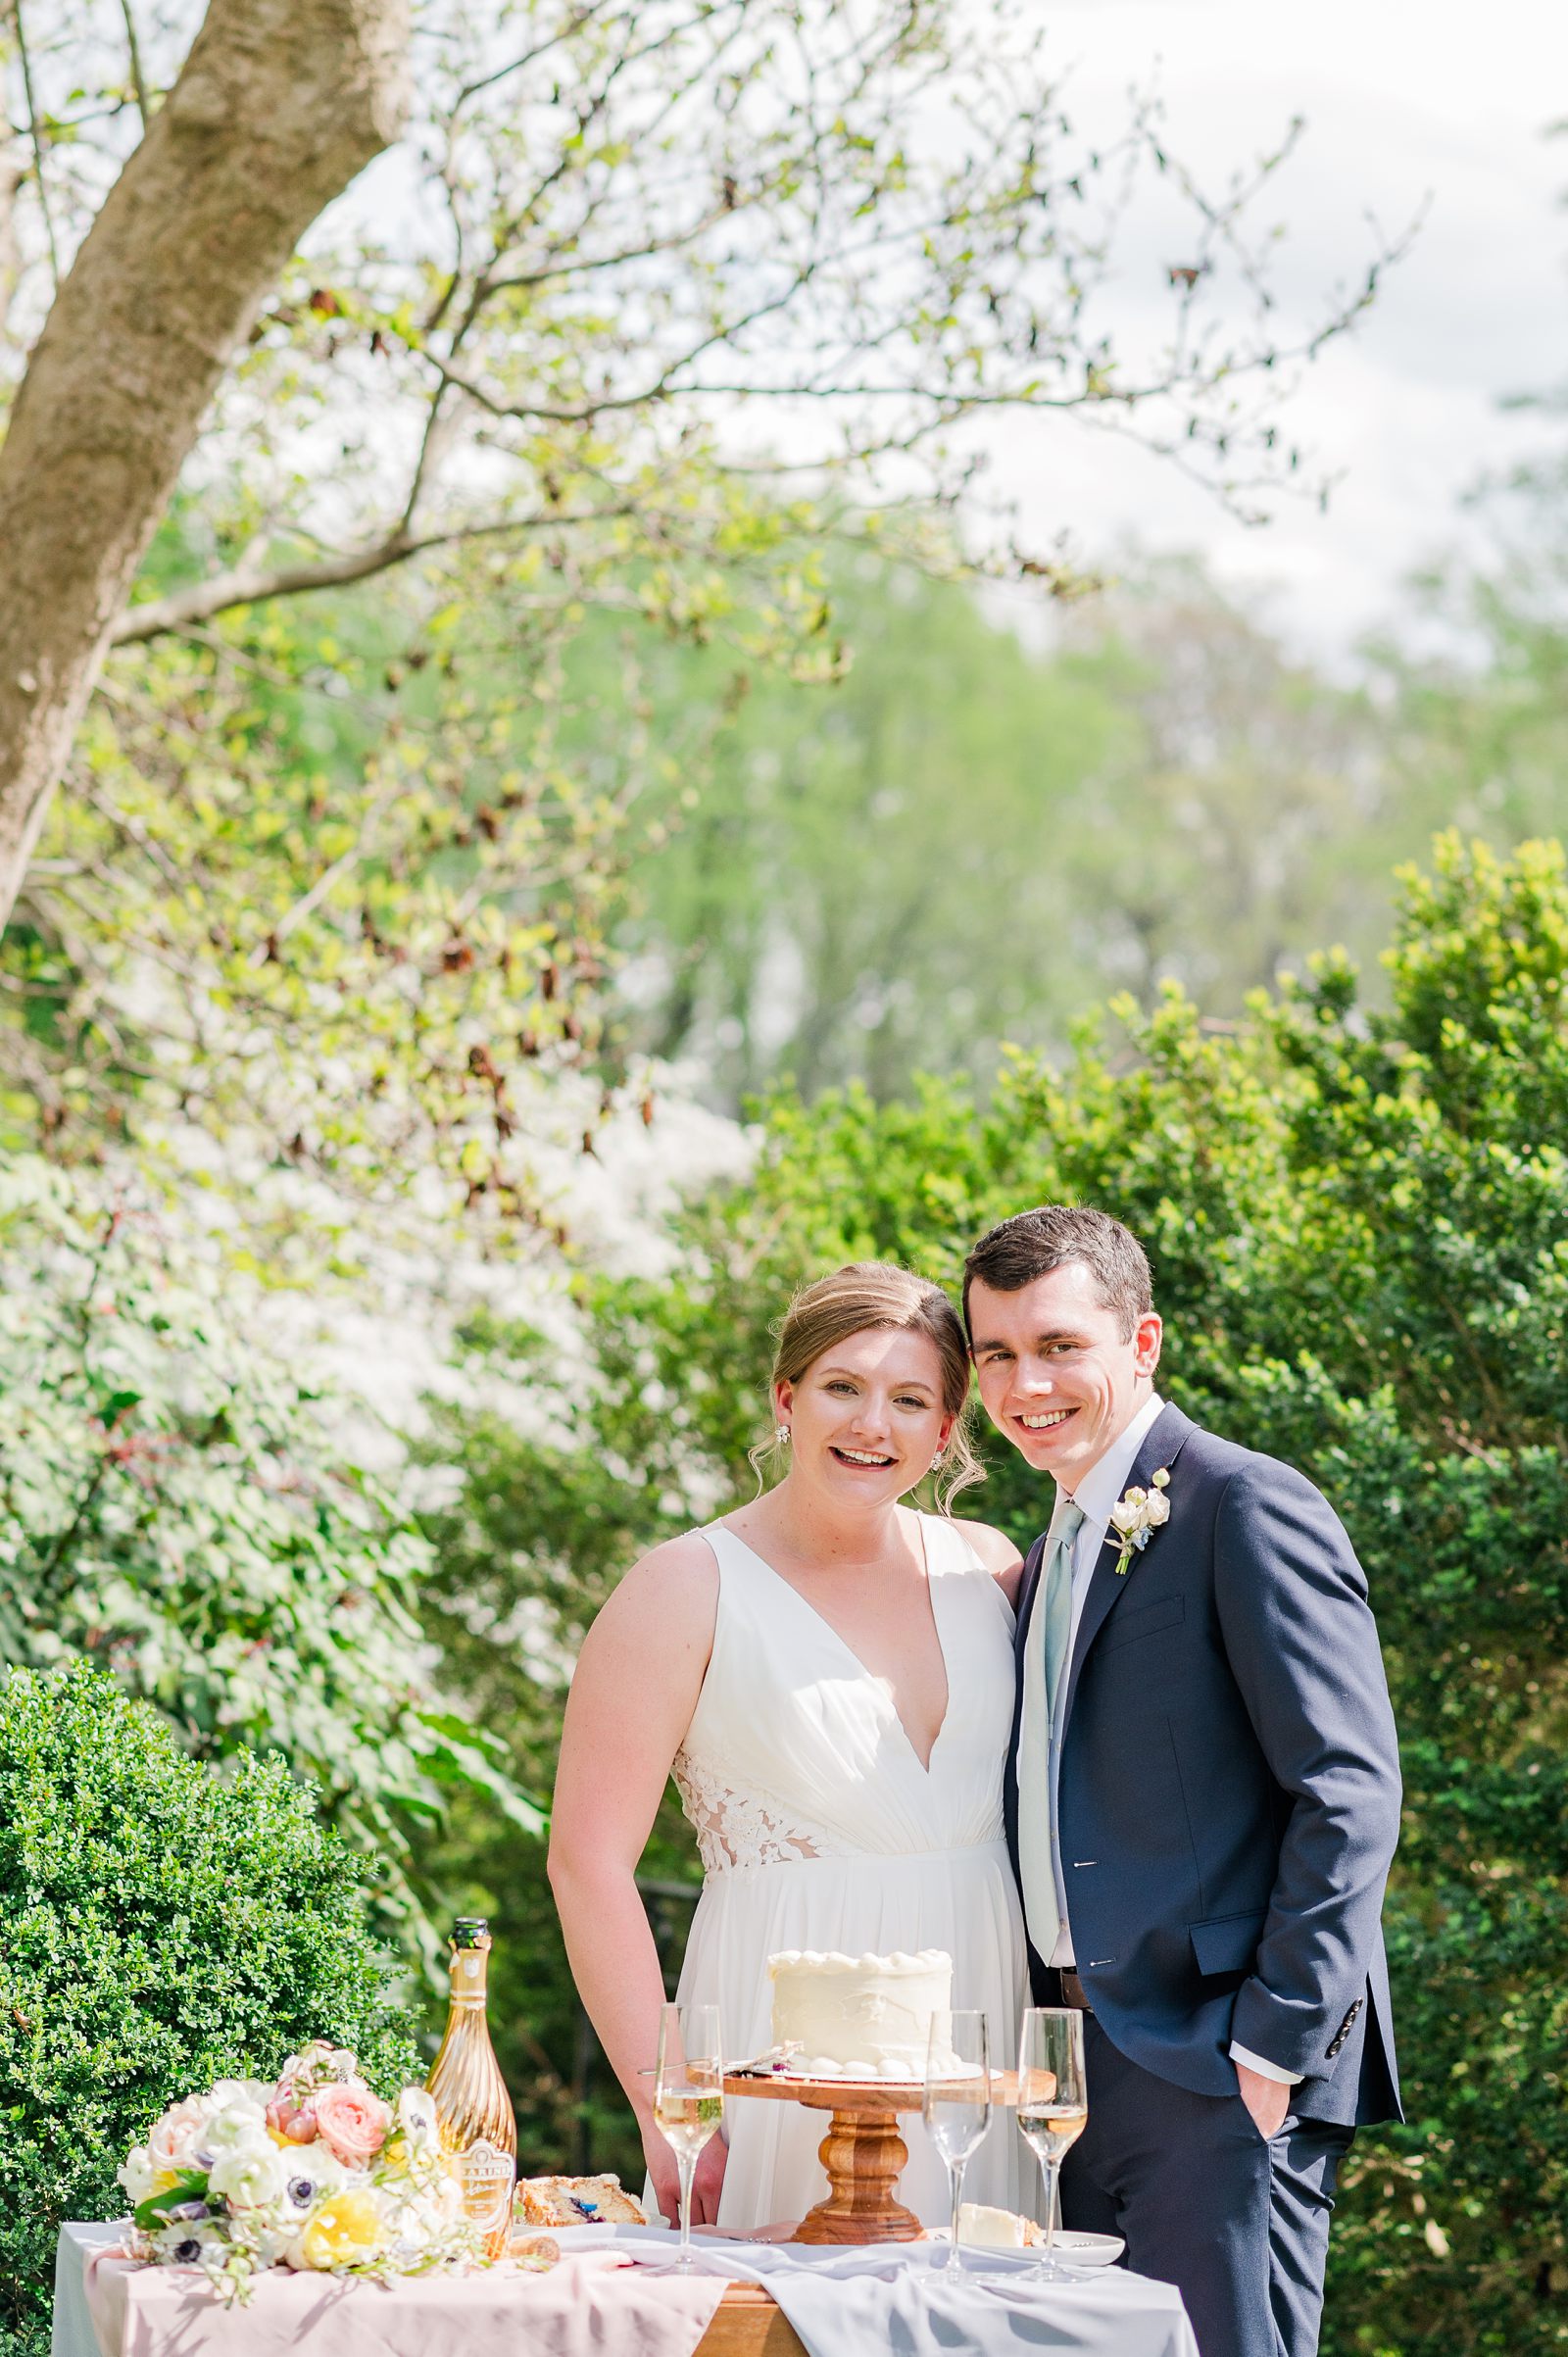 A Spring Intimate Virginia House Wedding by Richmond Wedding Photographer Kailey Brianne Photography.